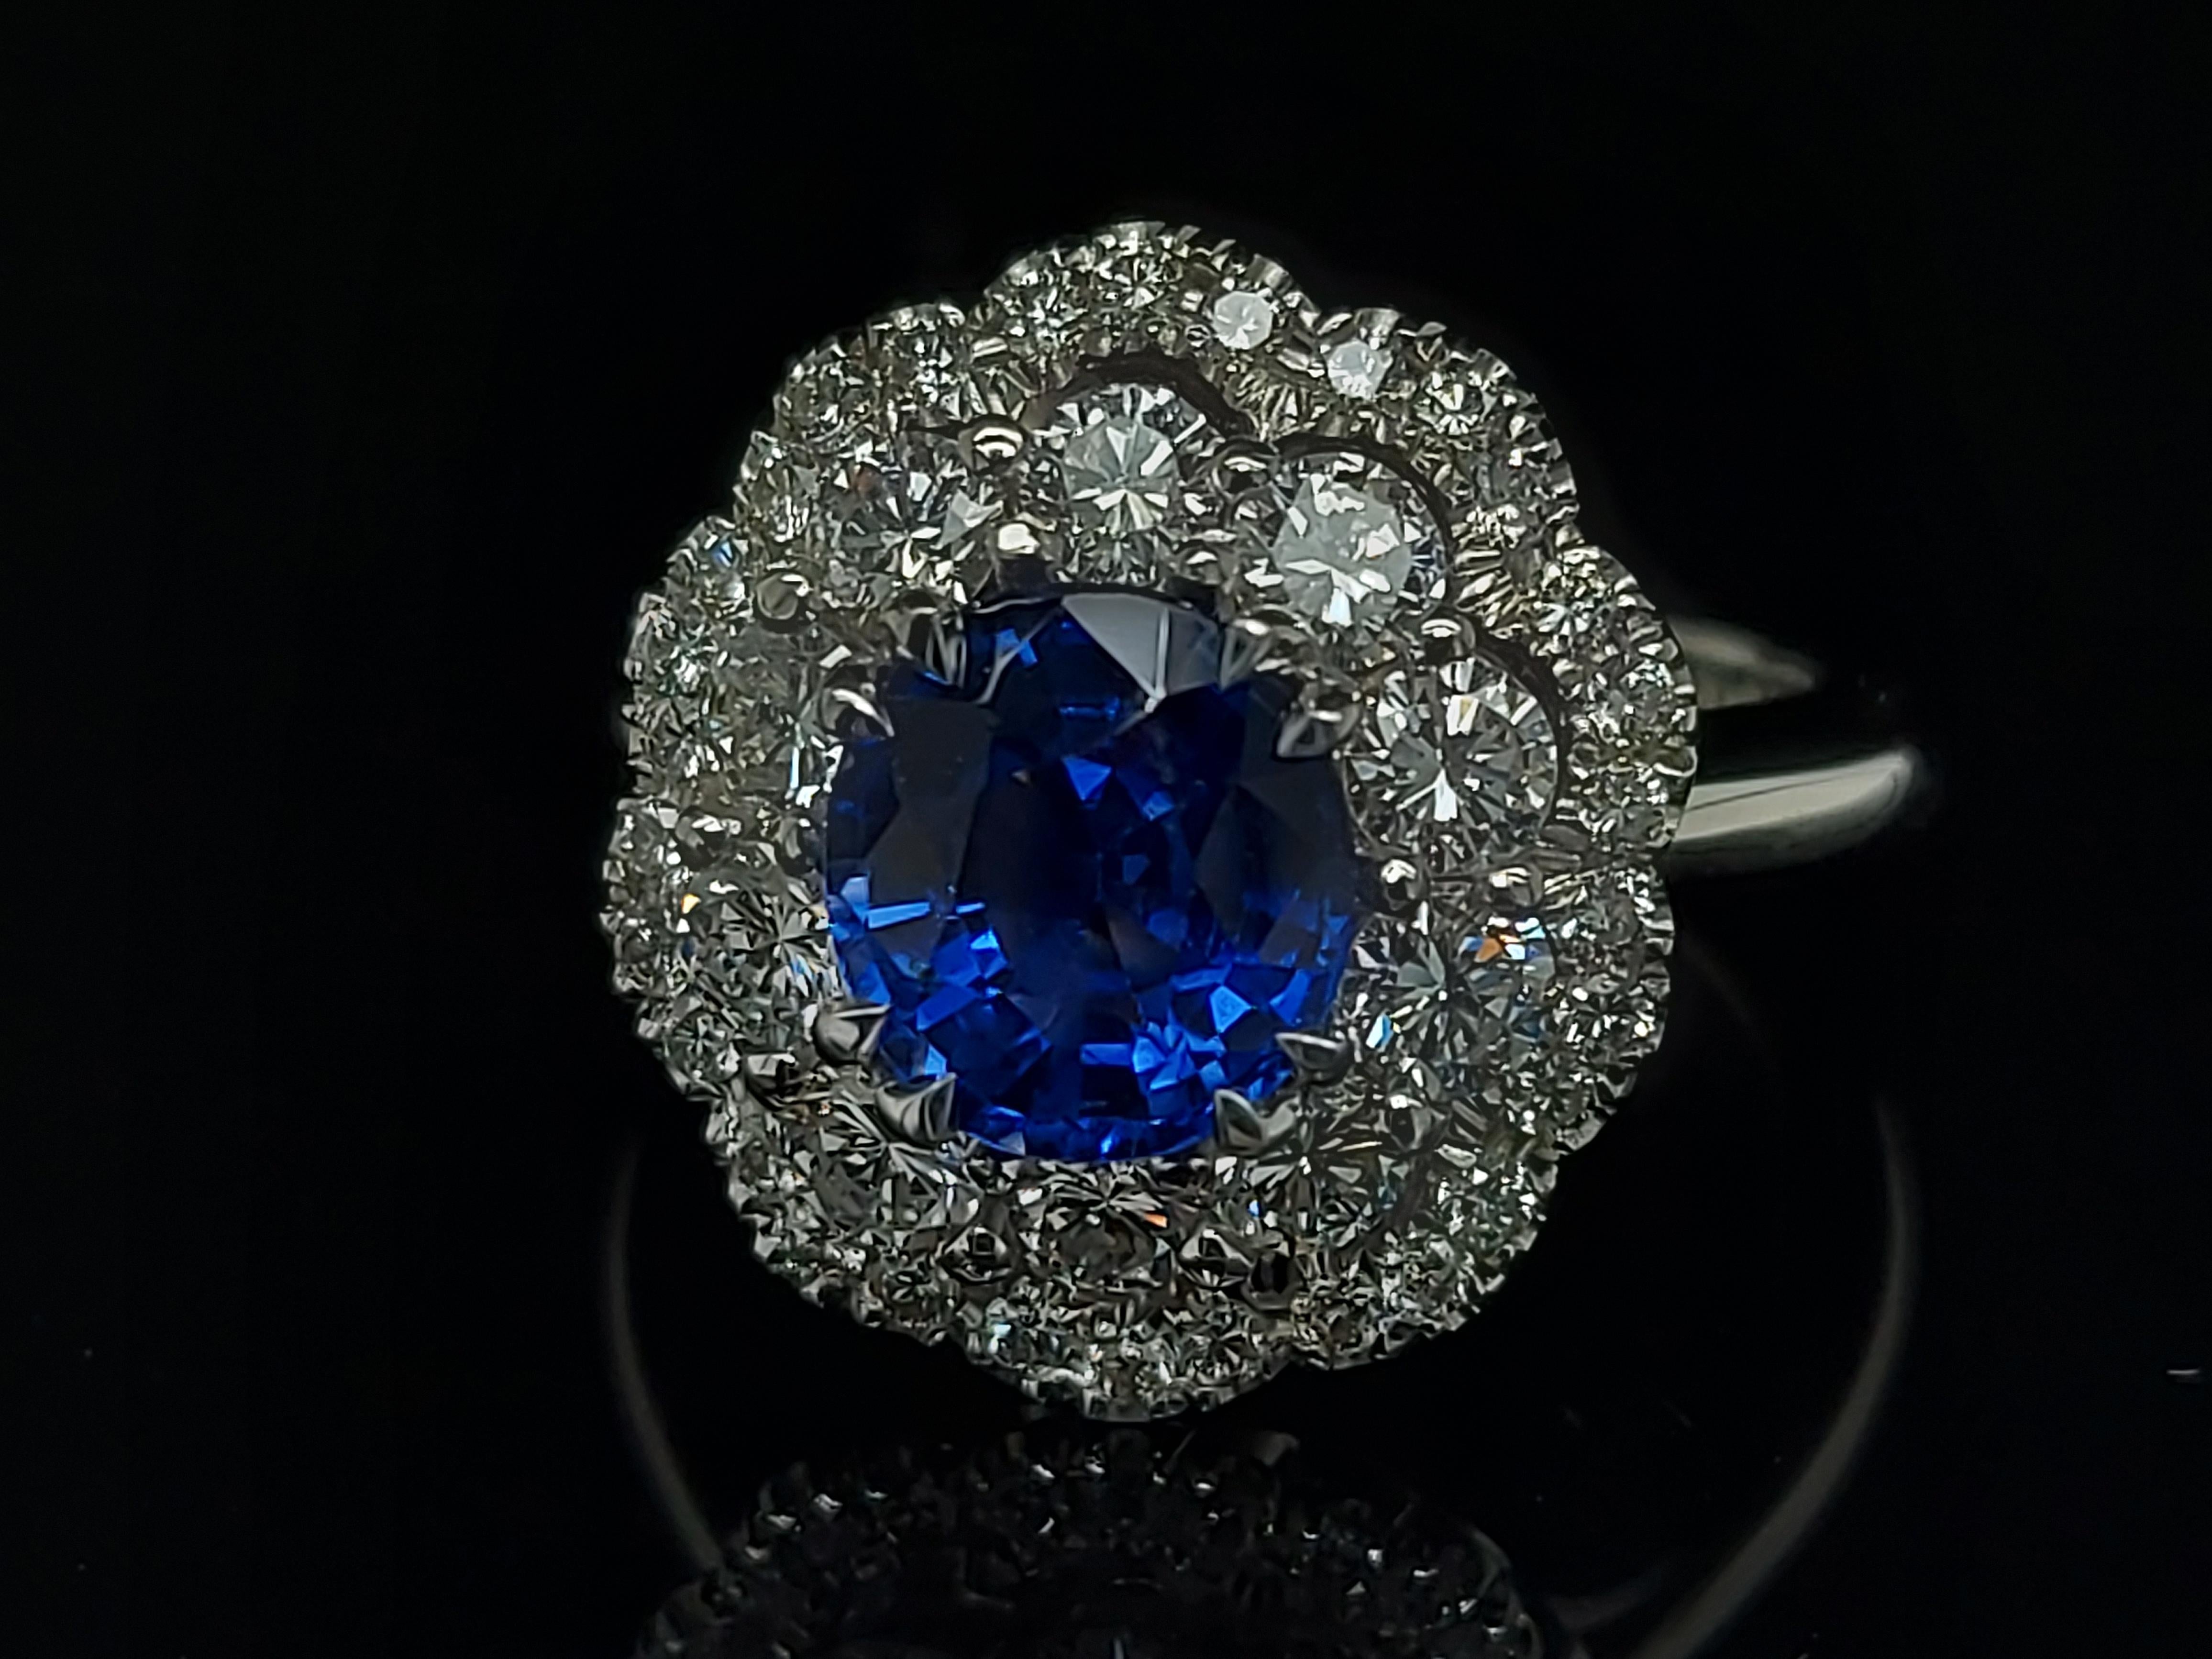 Exceptional 18 Karat Gold Ring with 2.43 Carat Sapphire and 1.36 Carat Diamonds For Sale 4